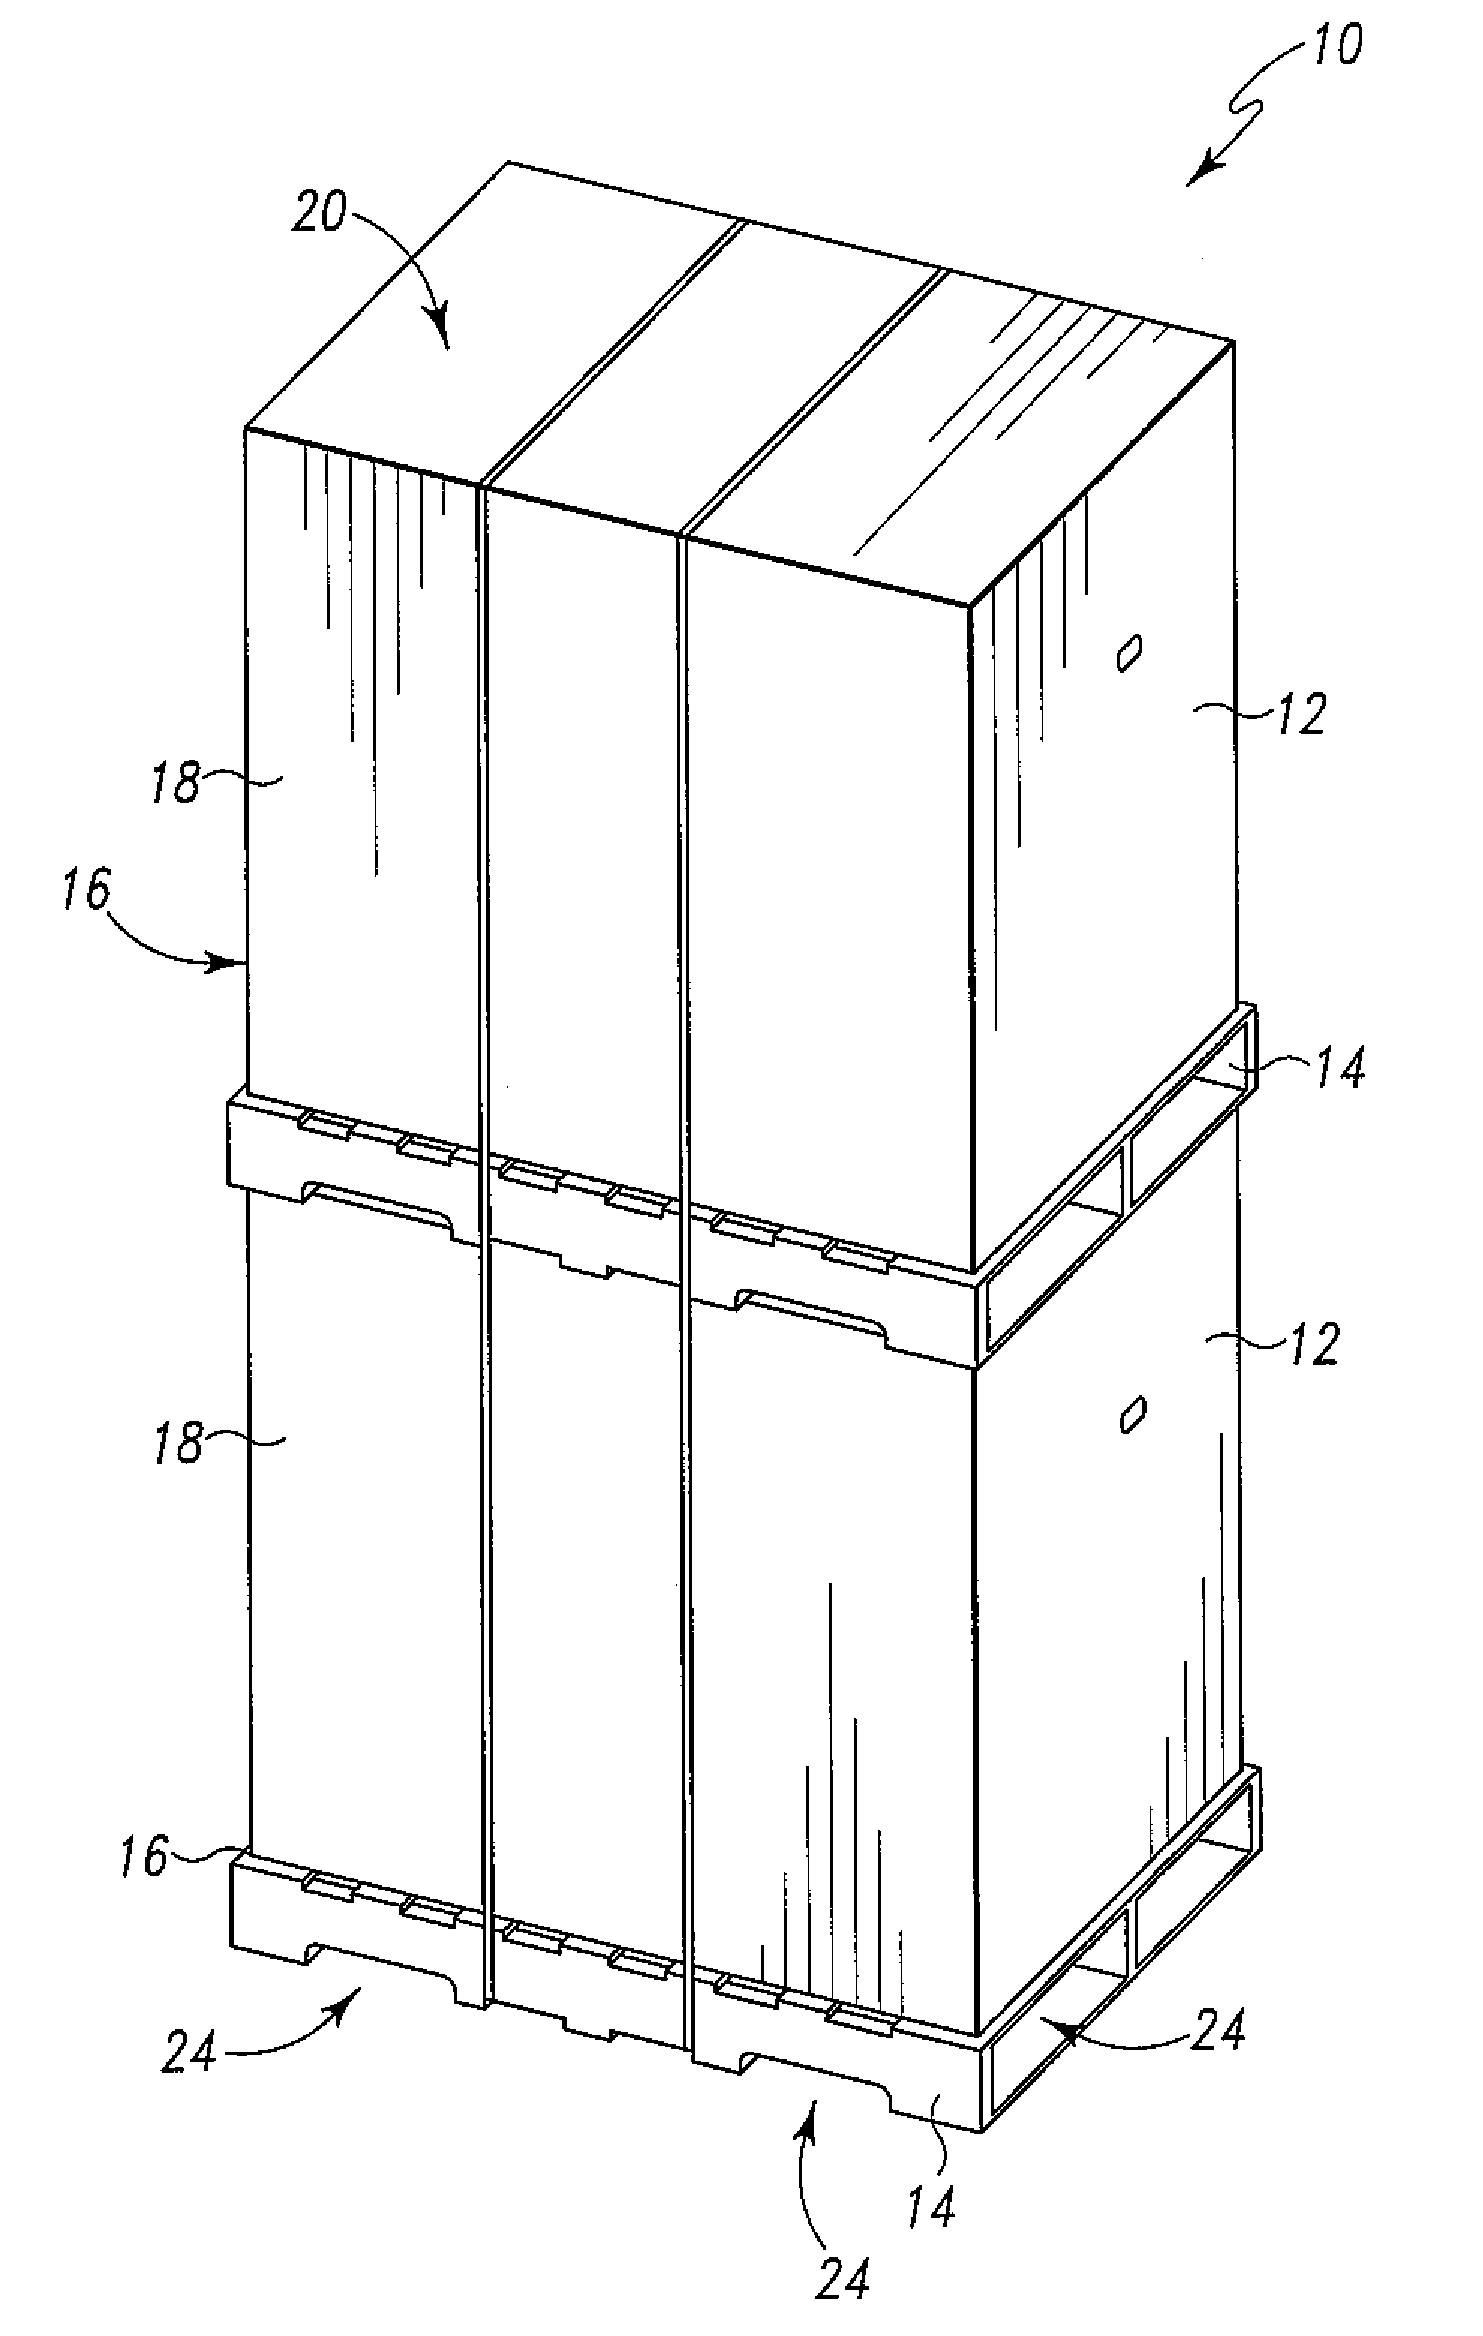 Double stacked pallet system for rolled sheet goods